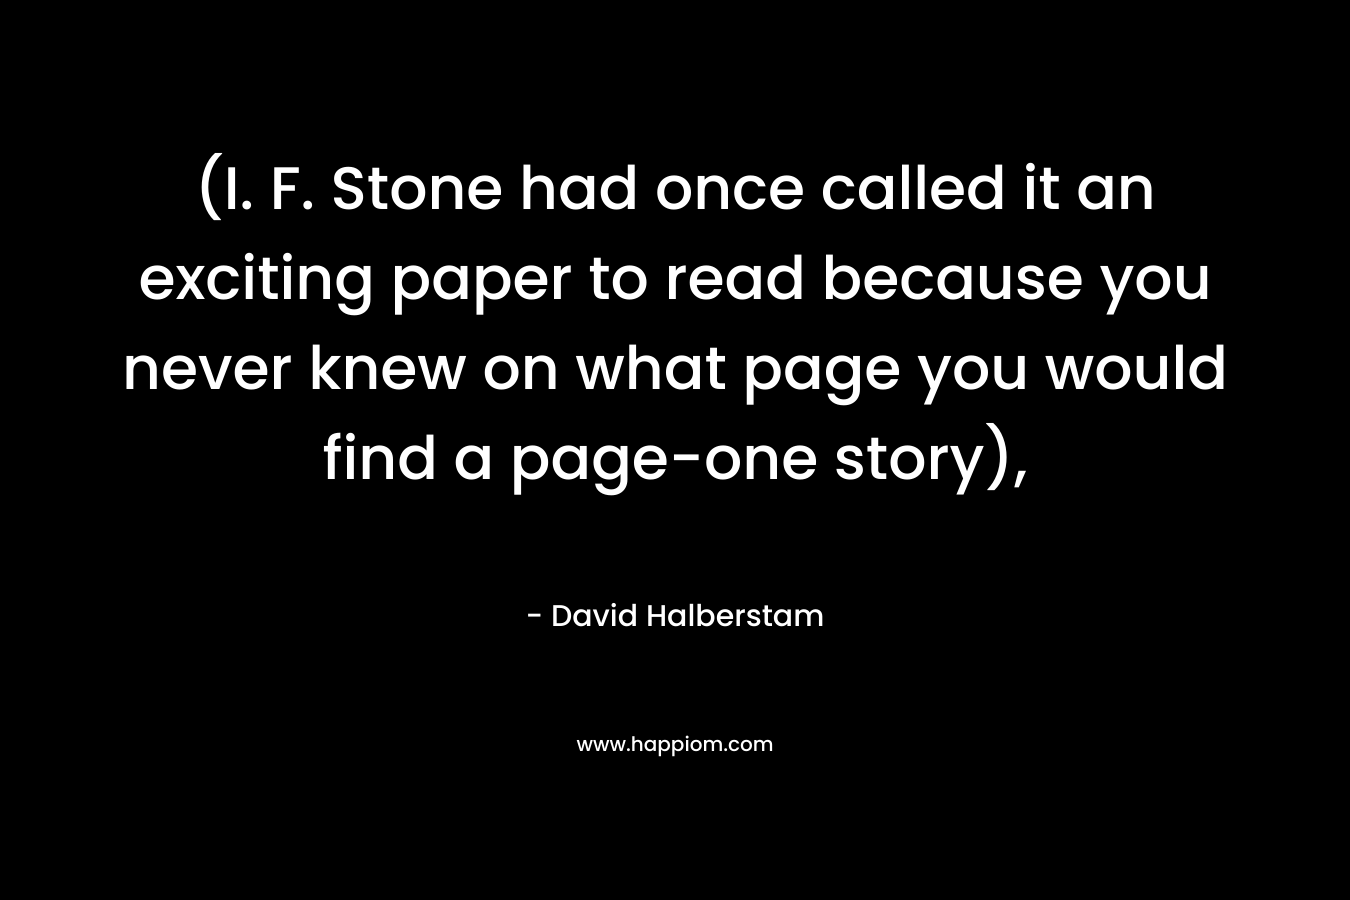 (I. F. Stone had once called it an exciting paper to read because you never knew on what page you would find a page-one story), – David Halberstam